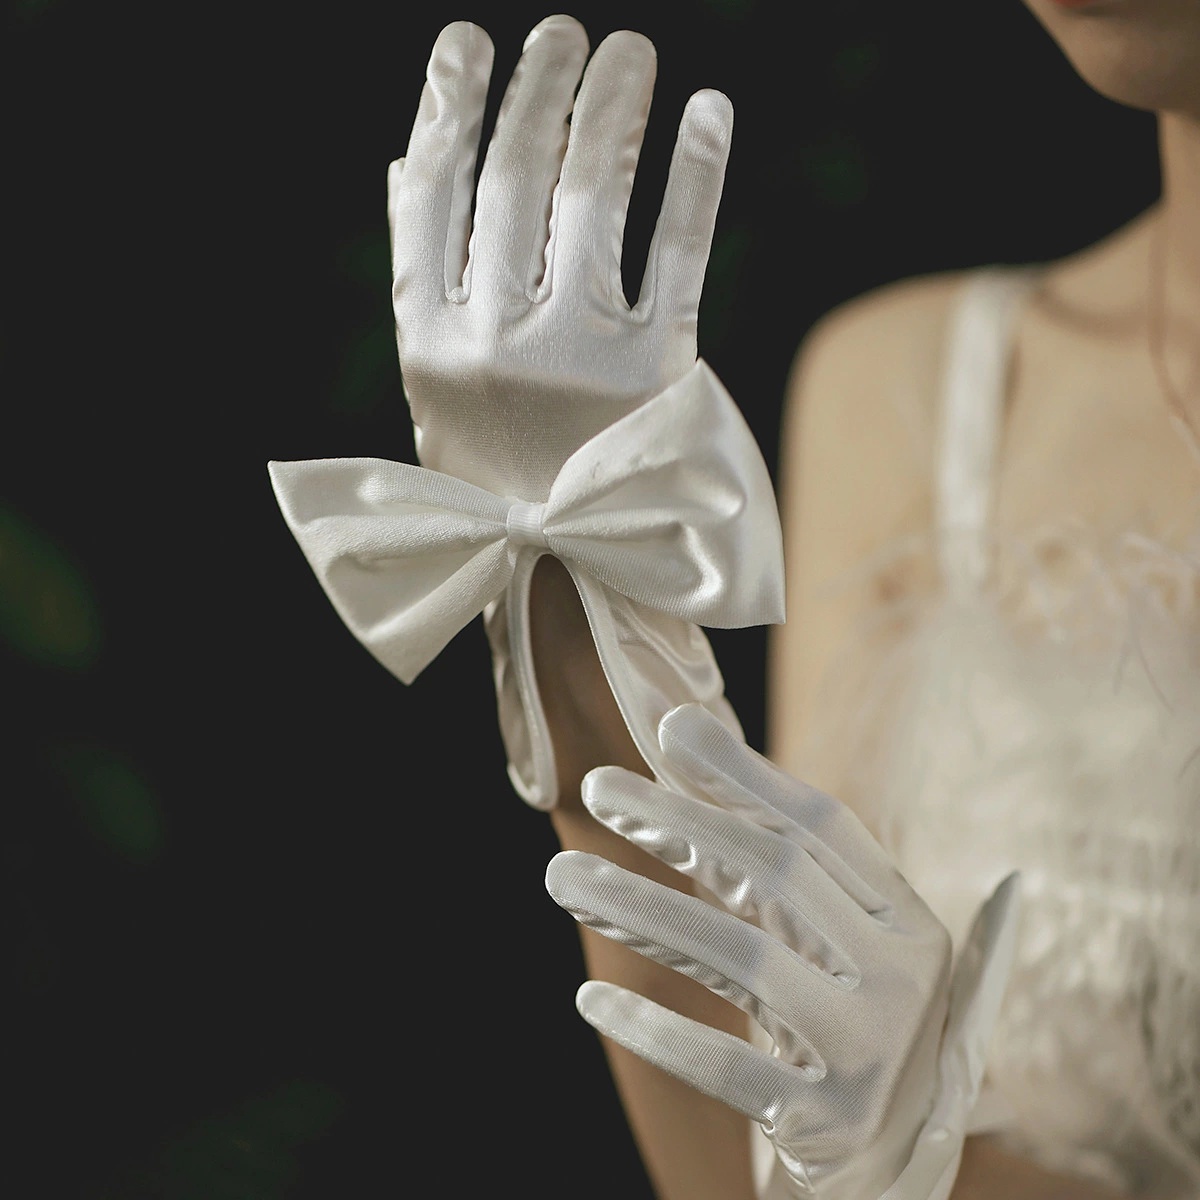  Bride wedding gown lace gloves white ceremonial wedding gloves Custom made dress, gloves are free